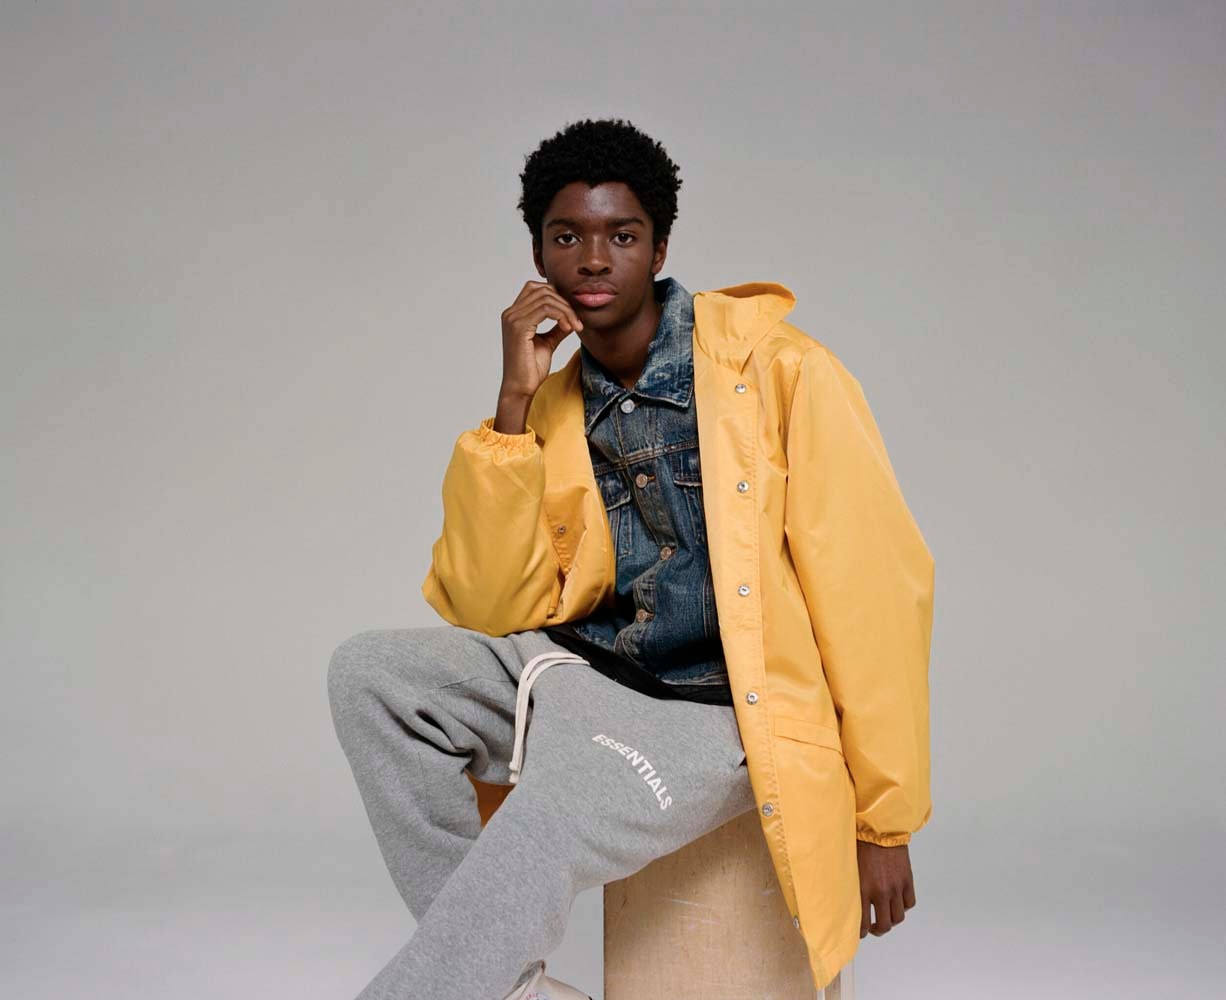 ESSENTIALS Fall winter 2018 Campaign Converse Sneakers imagery colorways drop release date info pacsun collaboration hoodies shirts sweaters leggings shorts denim jeans jackets hoodies tees branding logos jerry lorenzo fear of god fog